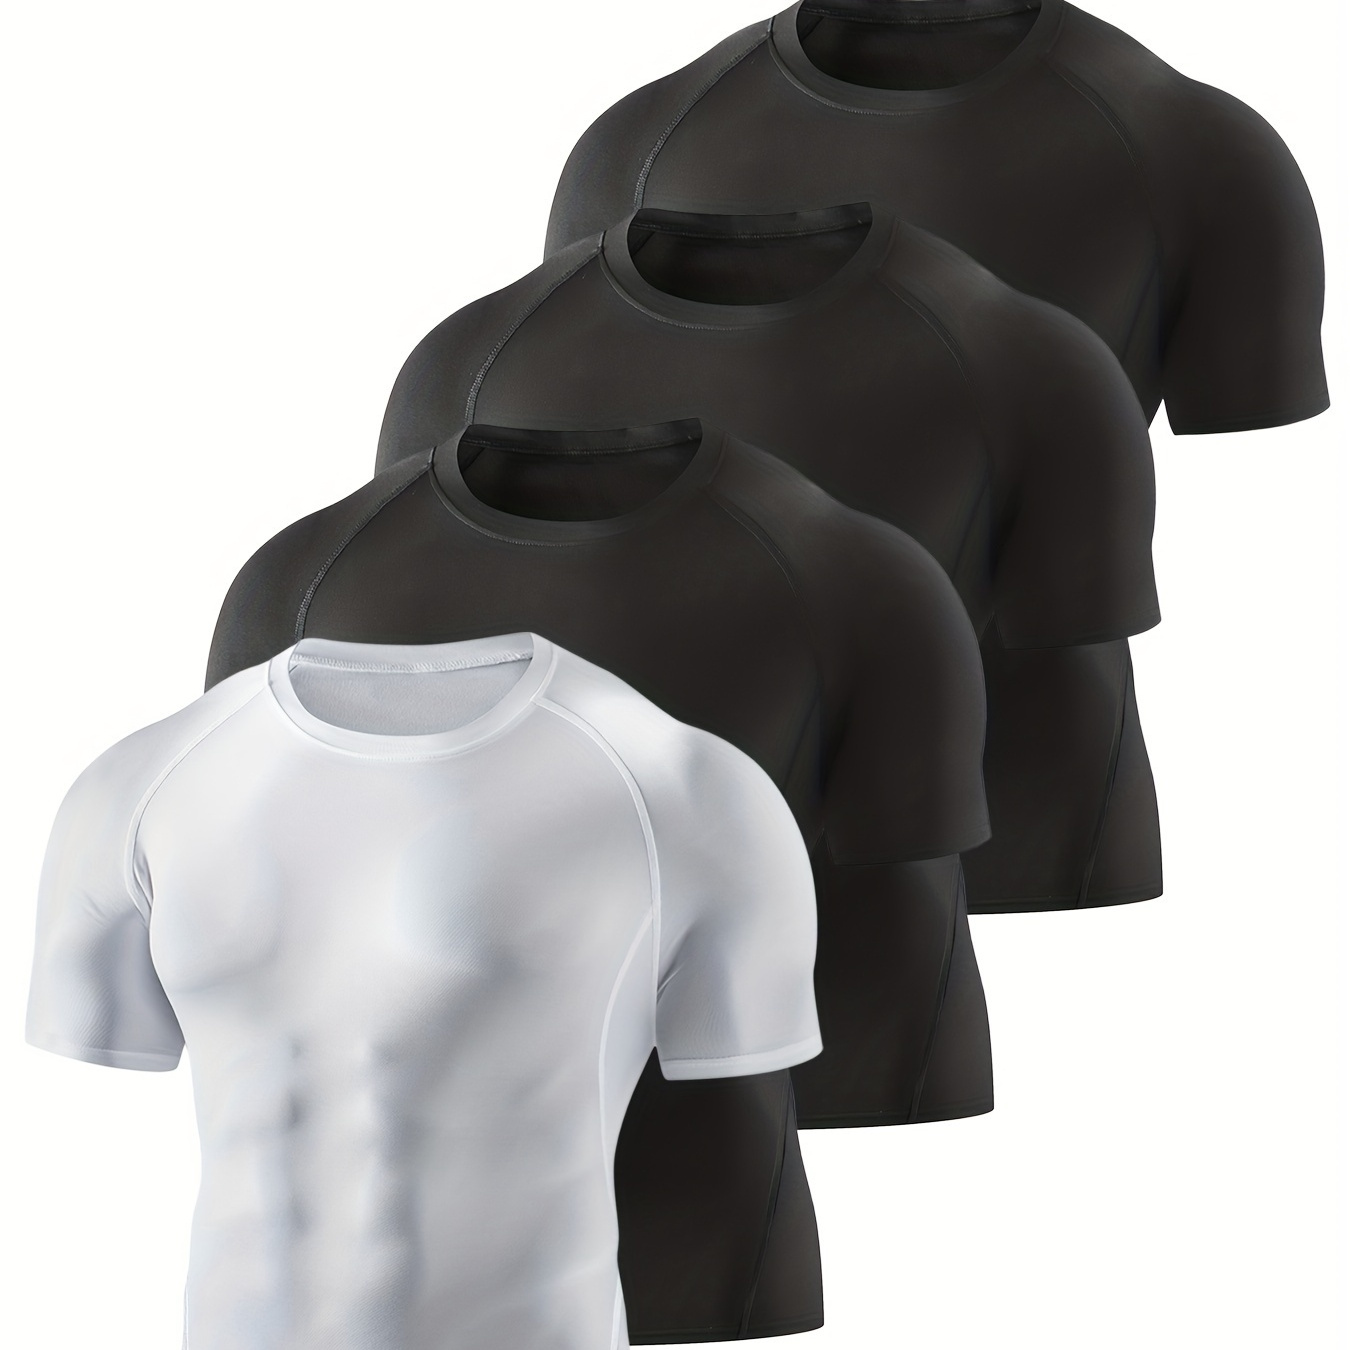 

4 Pack Compression Shirts, Men's Solid Stretch Short Sleeve Base Layer Athletic Undershirt Gear Workout T-shirt